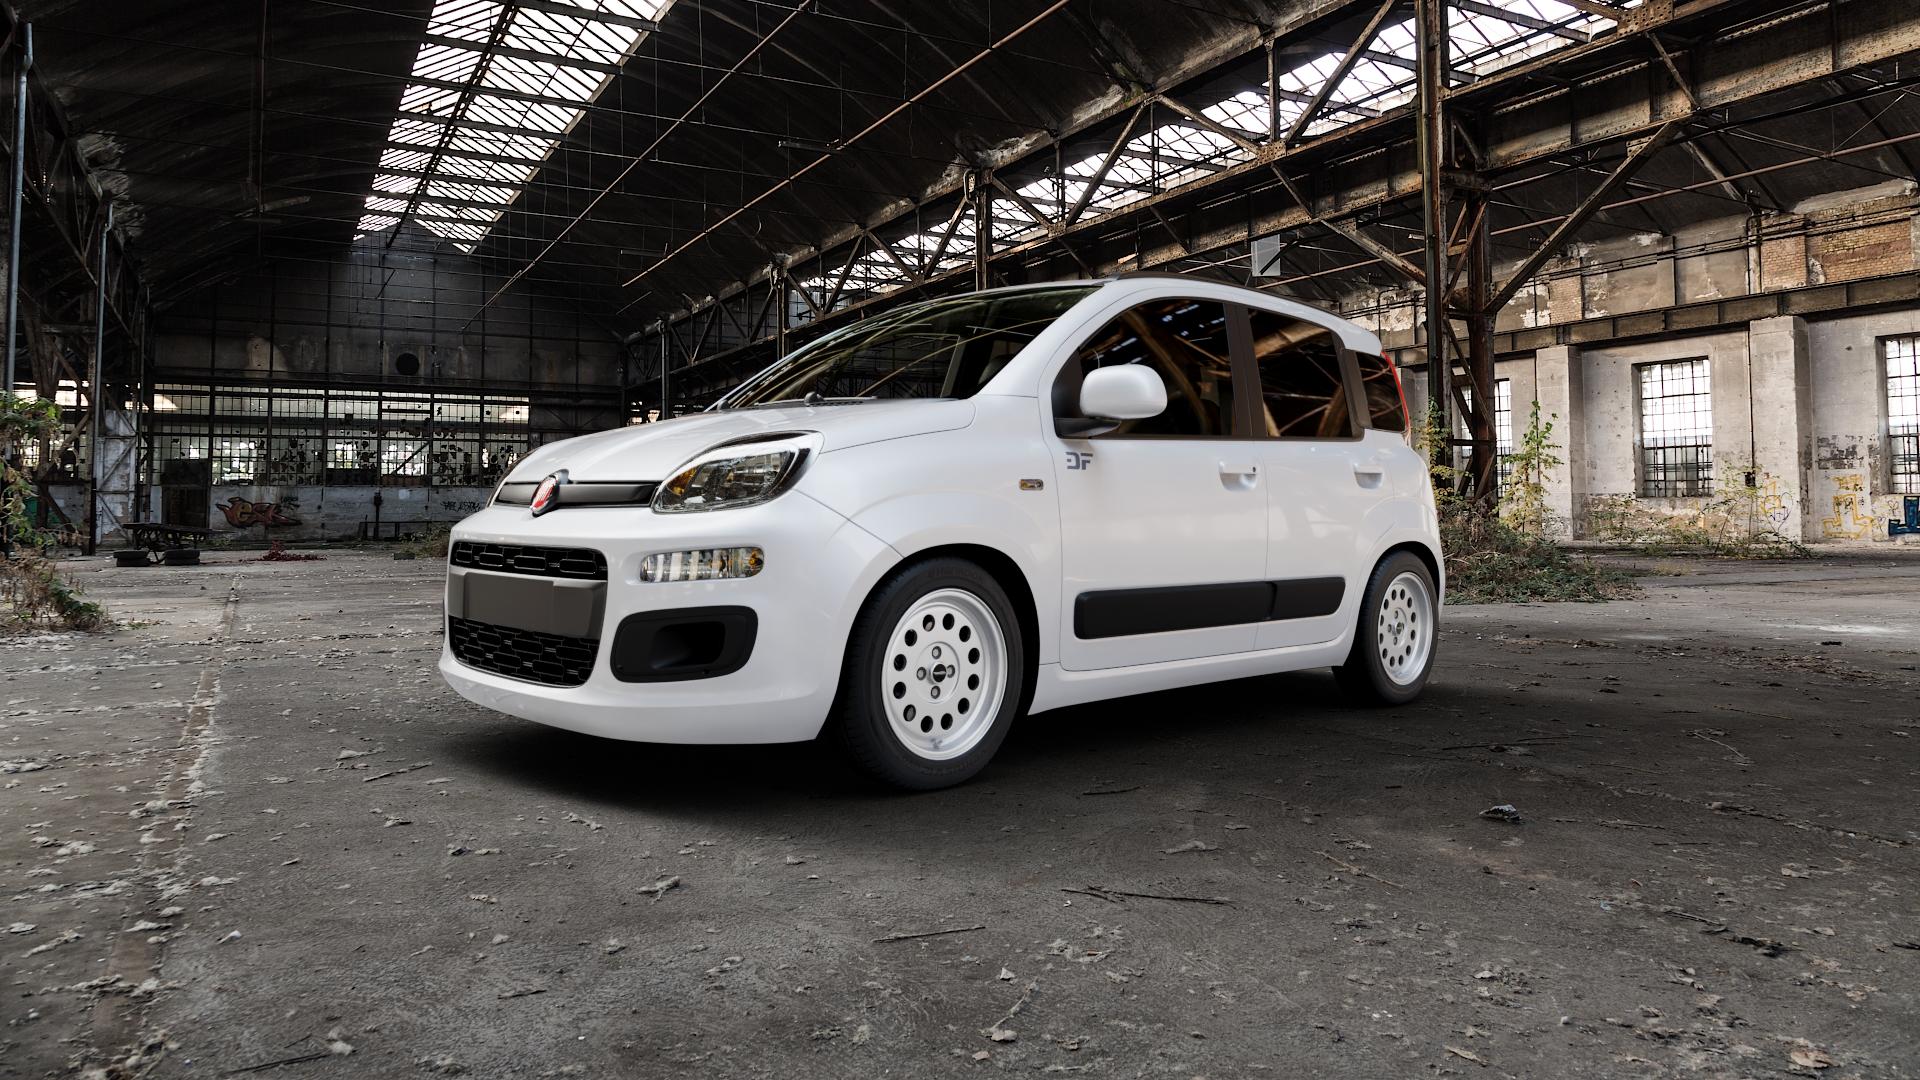 Fiat Panda 4x4 Type 312 1,3l Multijet 4x4 70kW (95 hp) Wheels and Tyre  Packages | velonity.com